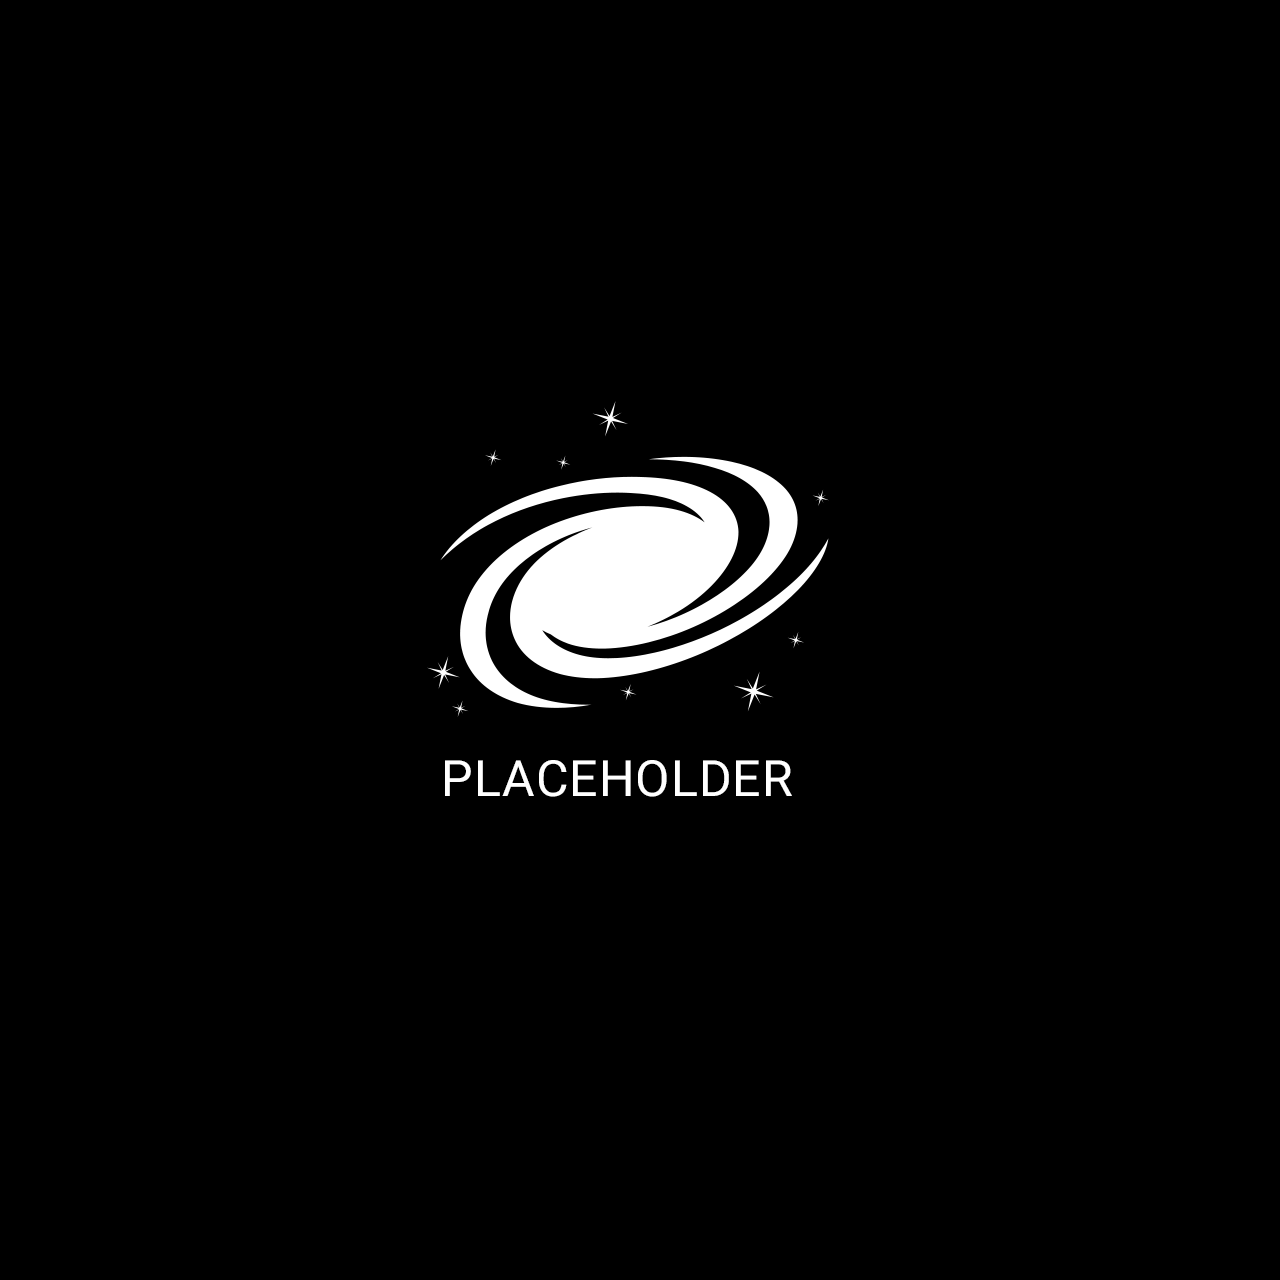 icon of a galaxy and white placeholder text on a black background